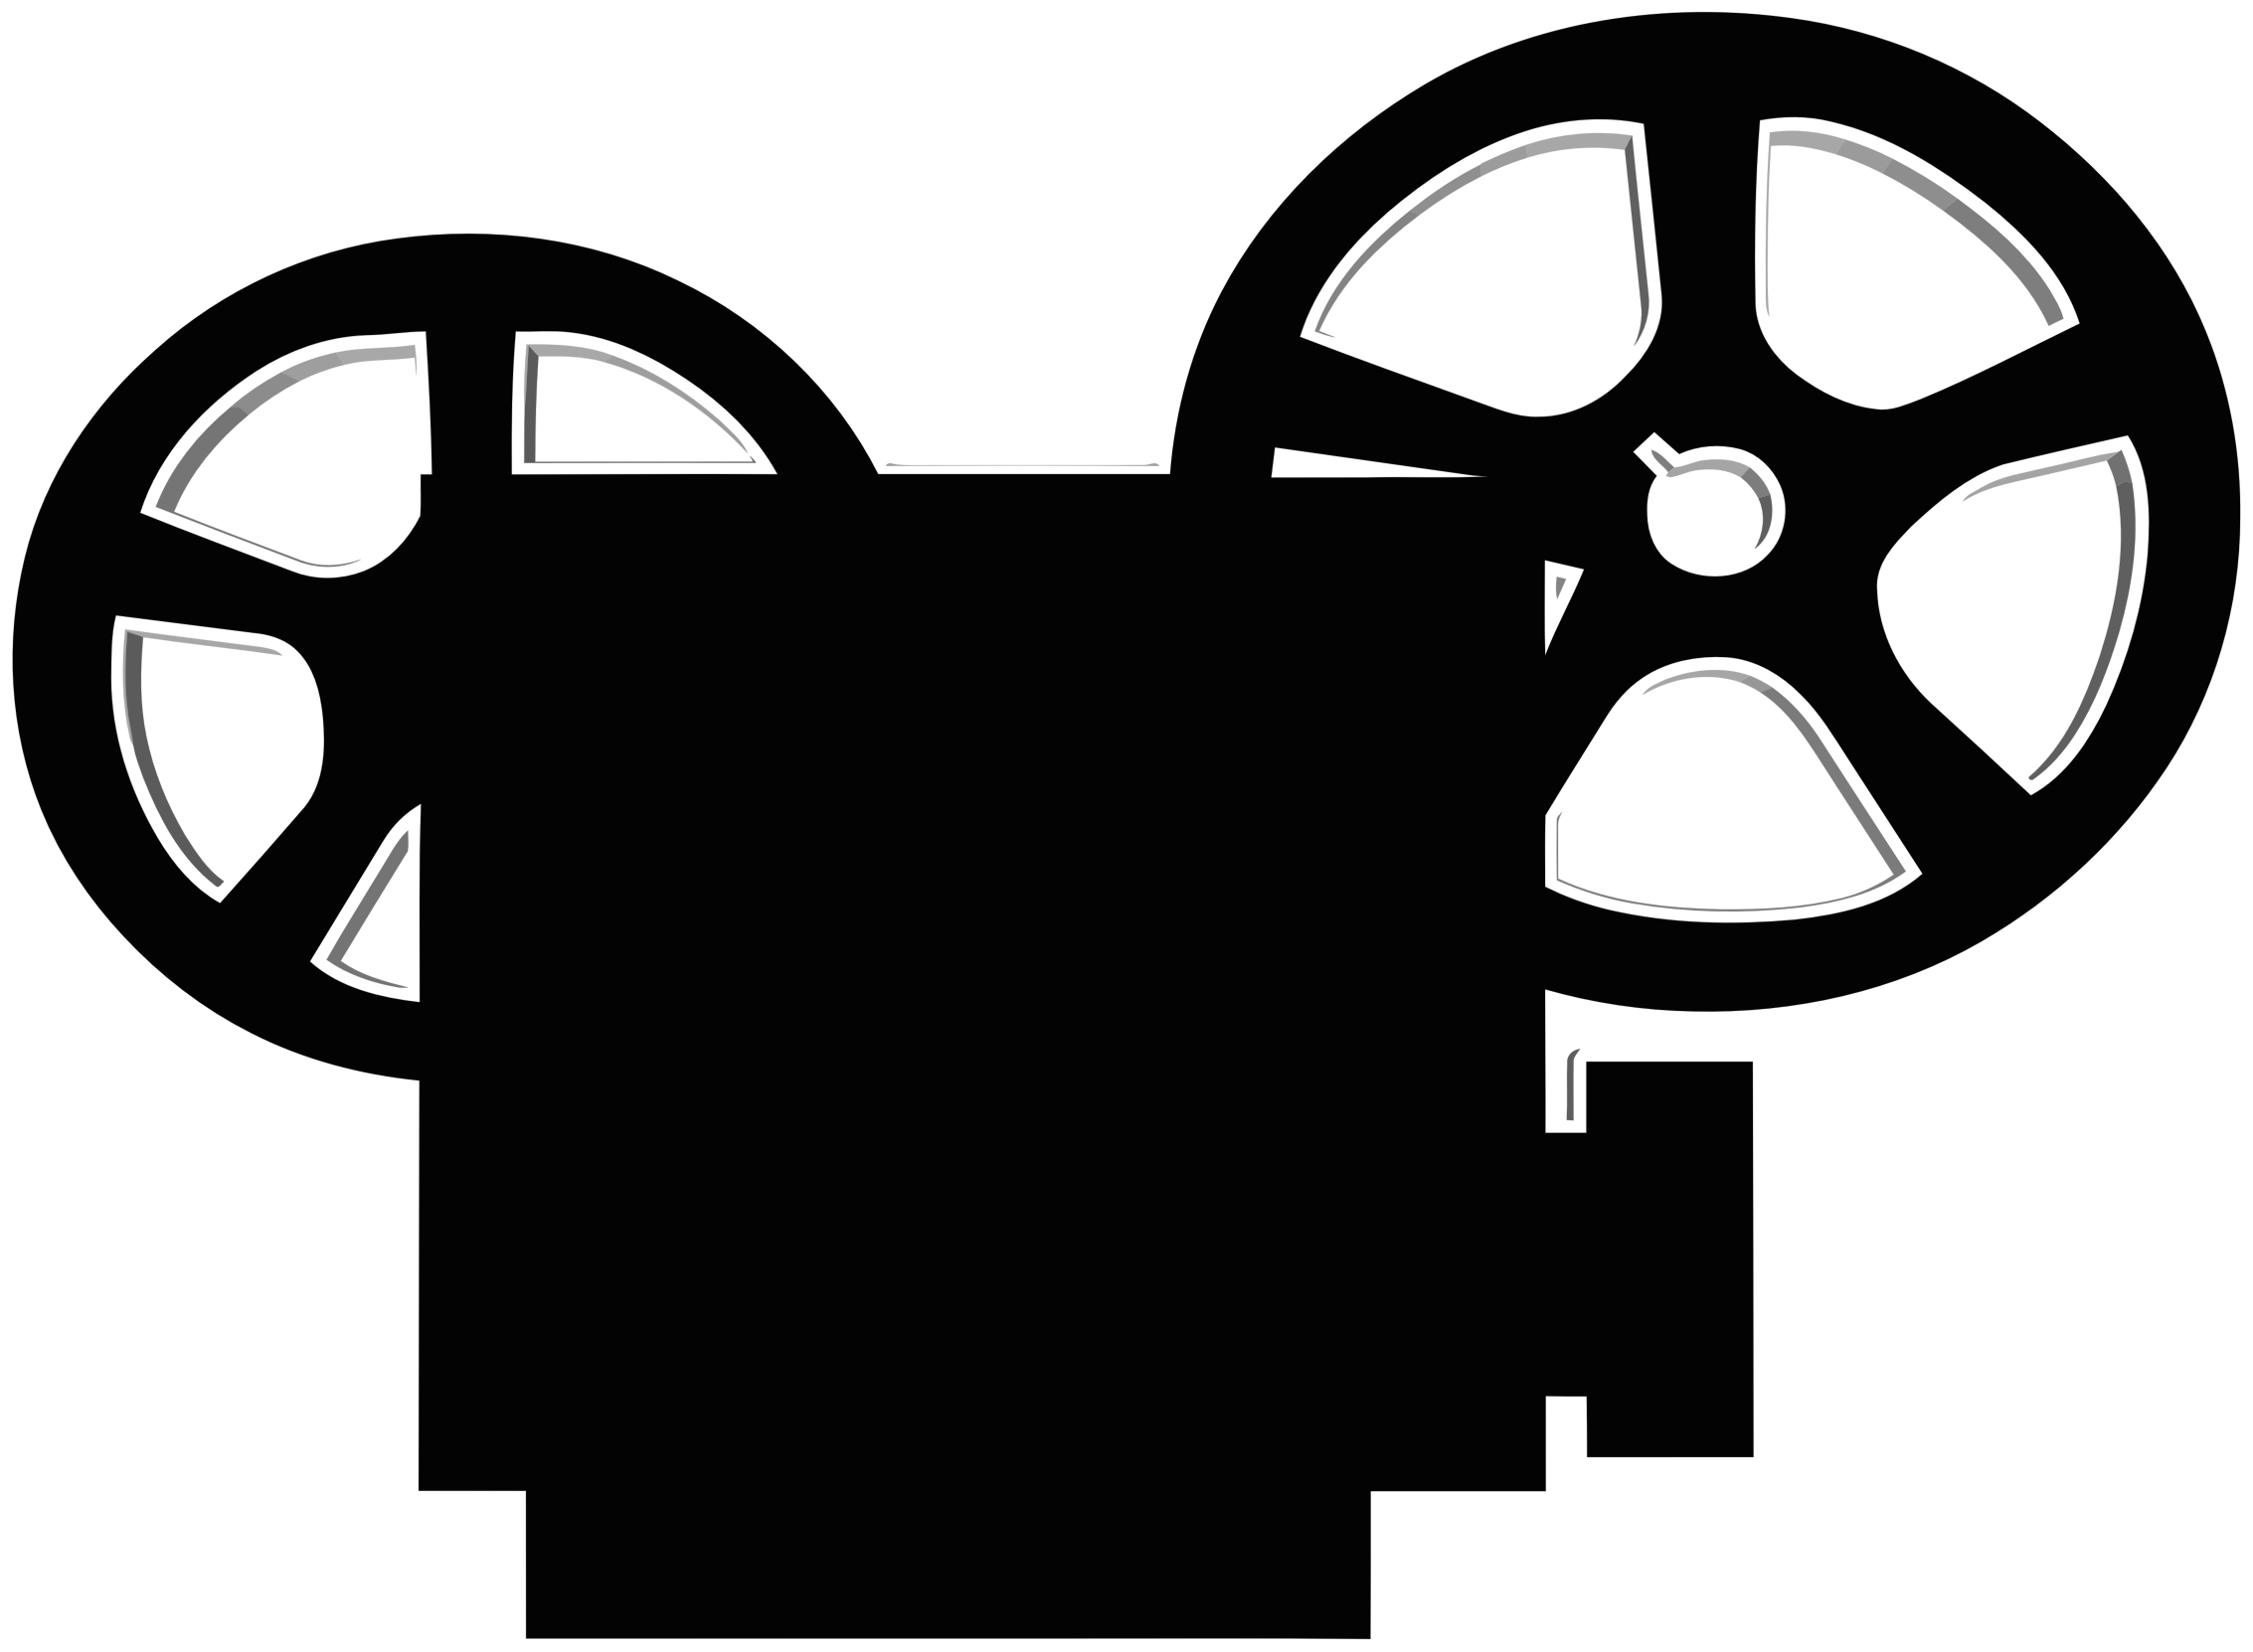 Movie screen clip art. Clipart gallery museum guide